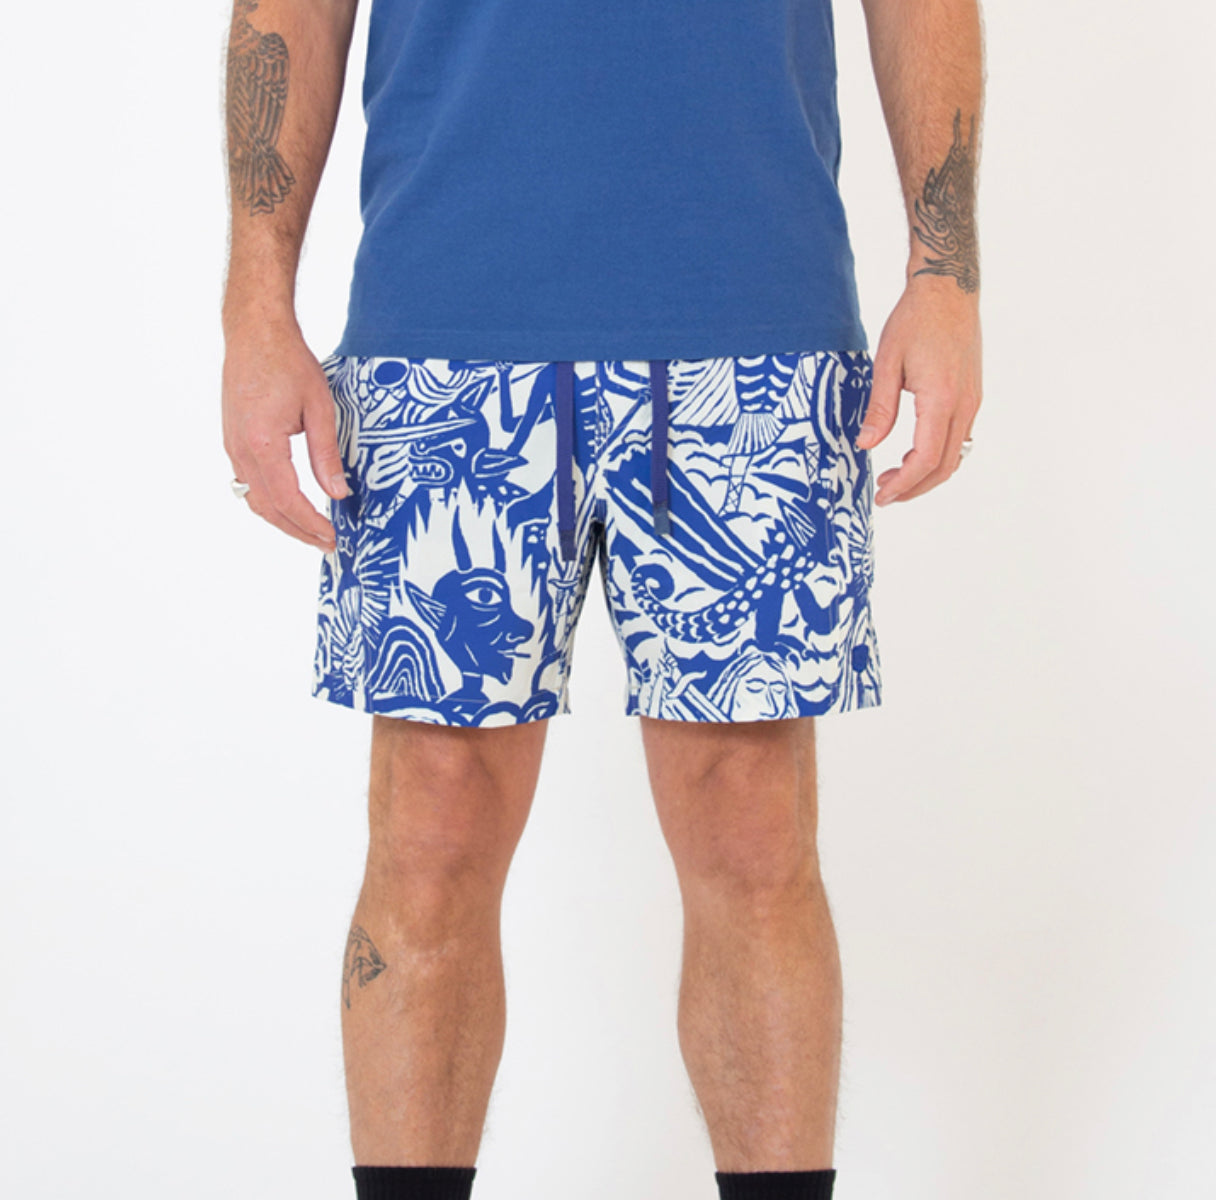 Angels and Demons Boardshort